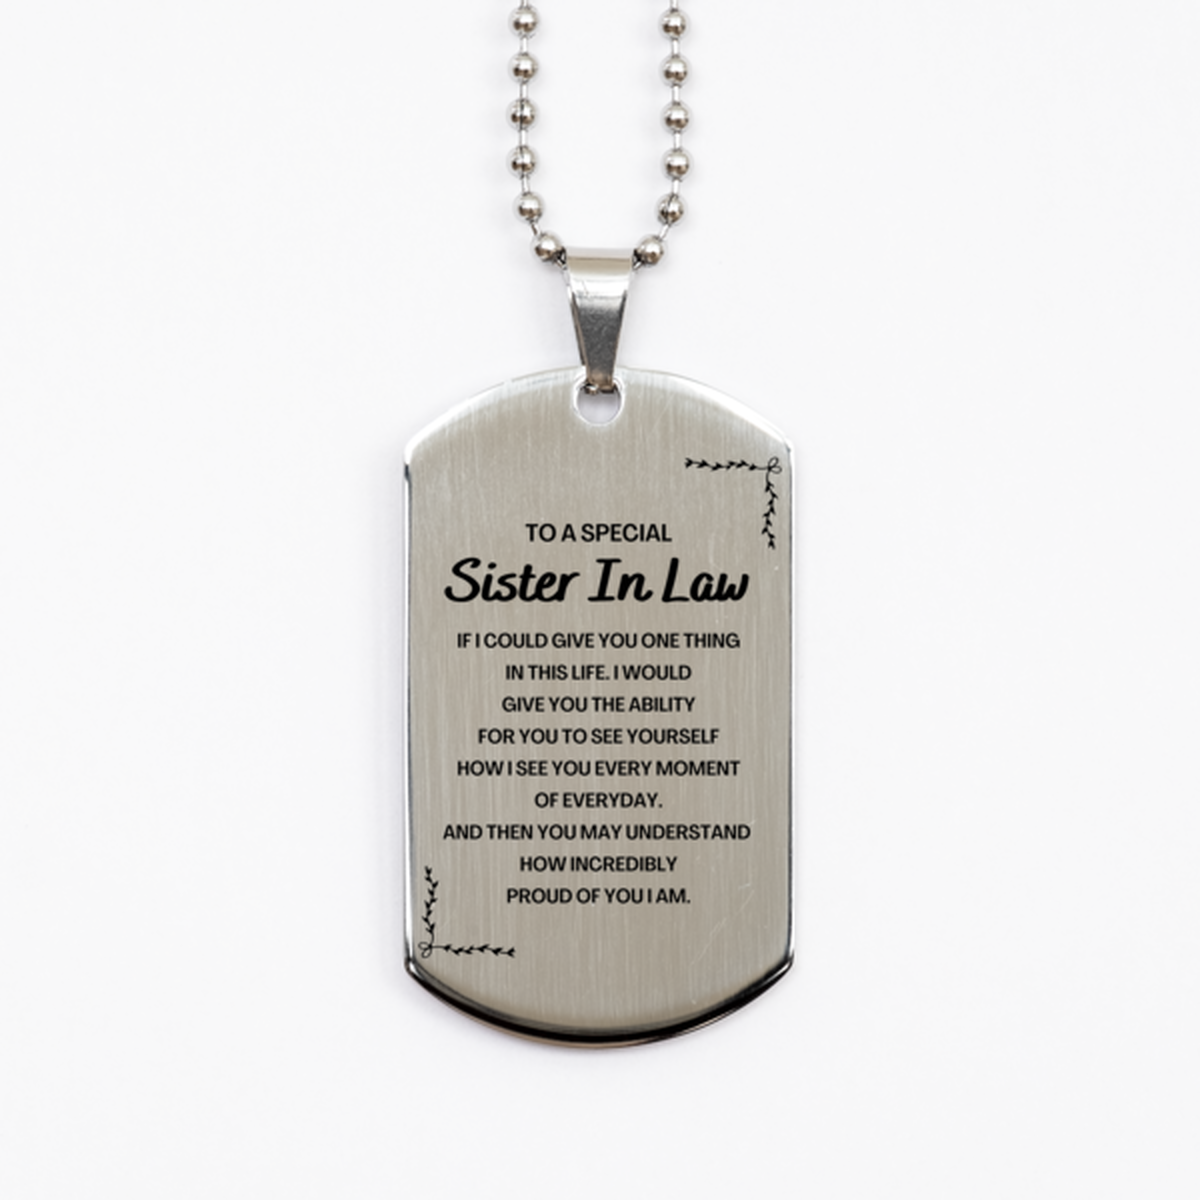 To My Sister In Law Silver Dog Tag, Gifts For Sister In Law Engraved, Inspirational Gifts for Christmas Birthday, Epic Gifts for Sister In Law To A Special Sister In Law how incredibly proud of you I am